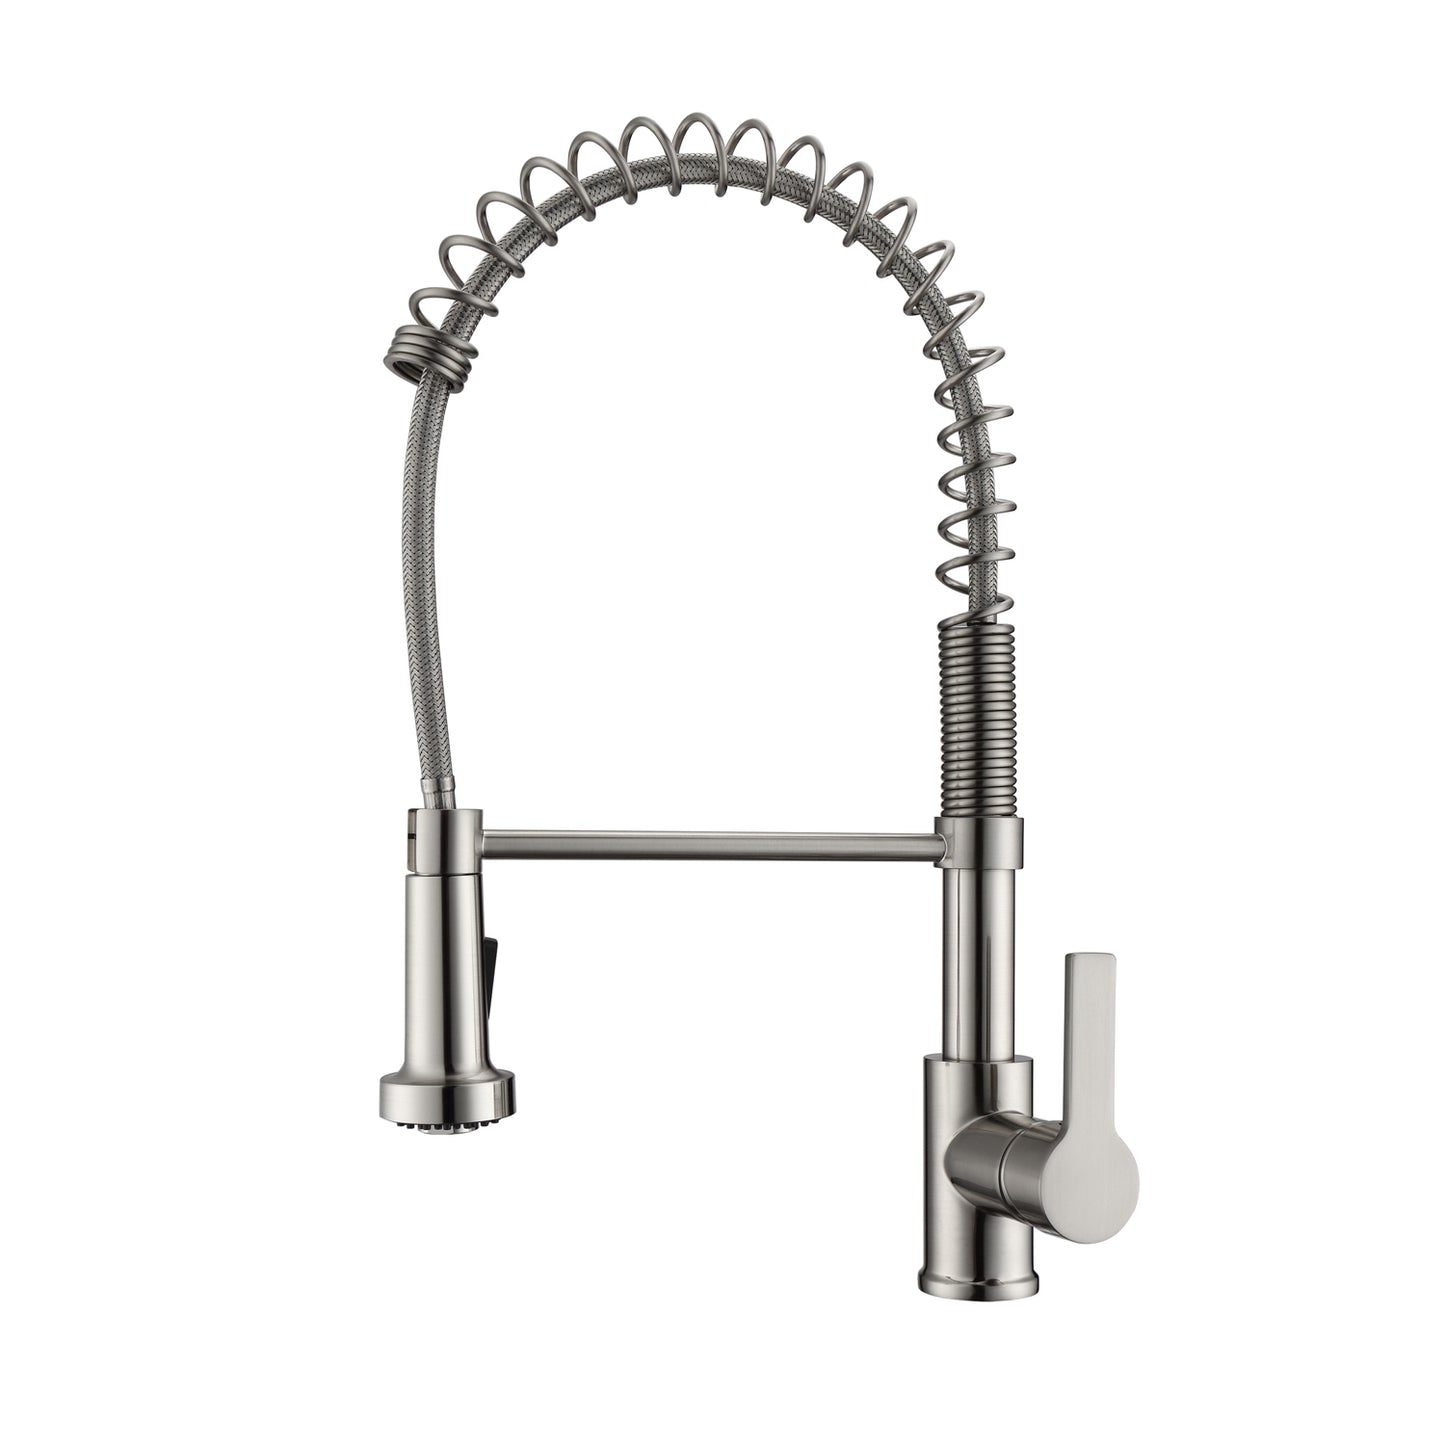 Niall 2 Kitchen Faucet, Spring, Pull-out Sprayer, Lever Handle, Brushed Nickel